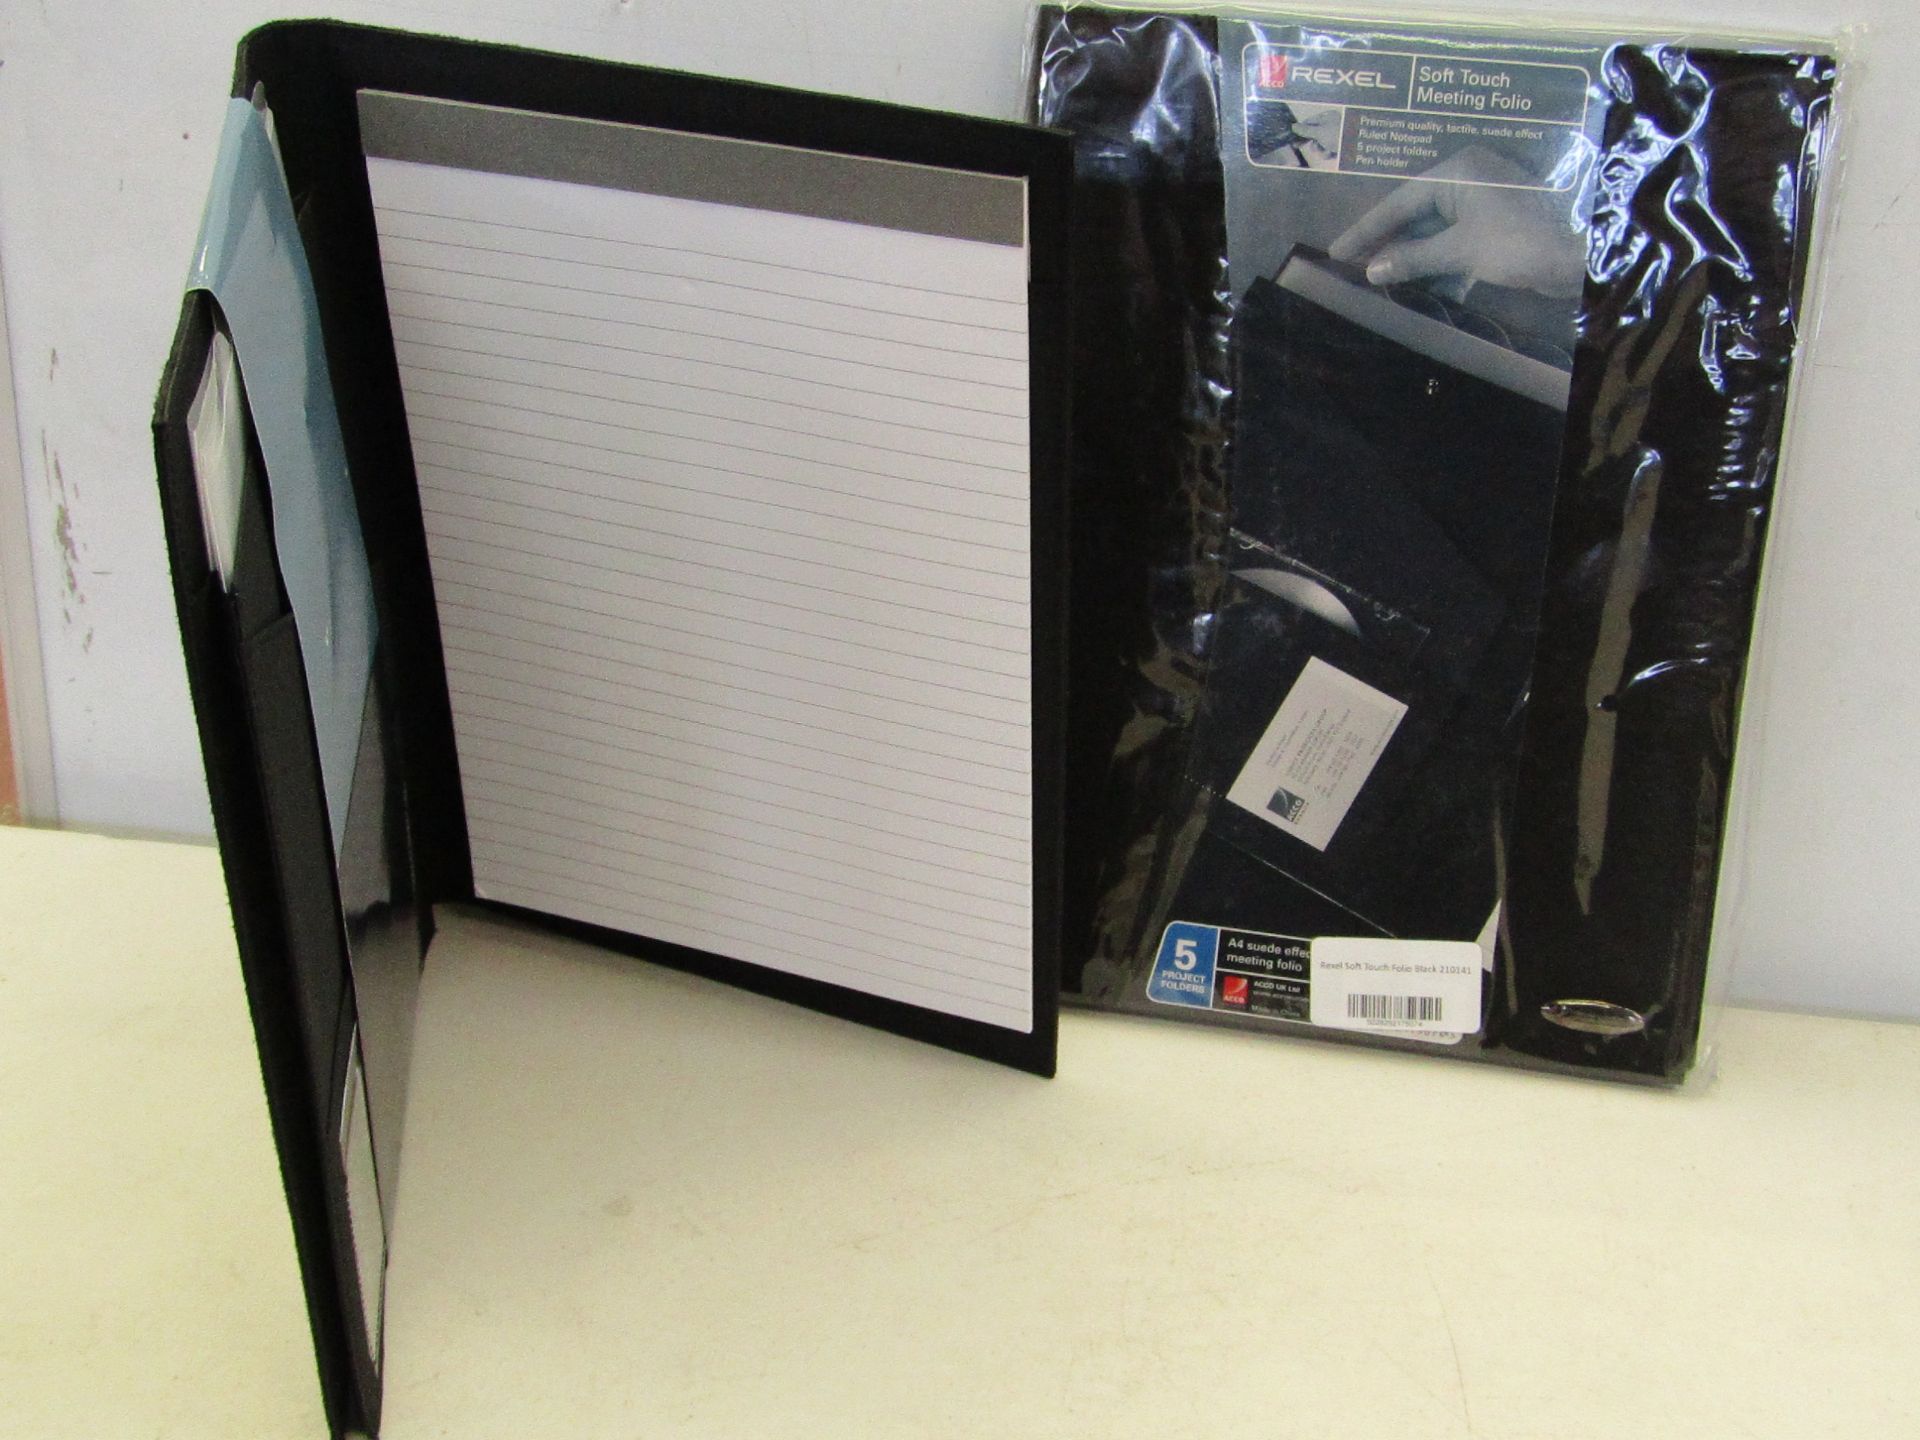 3x Rexel Soft Touch Meeting Folio, A4 size, suede effect, 5 project folders, black.  RRP: £27.62